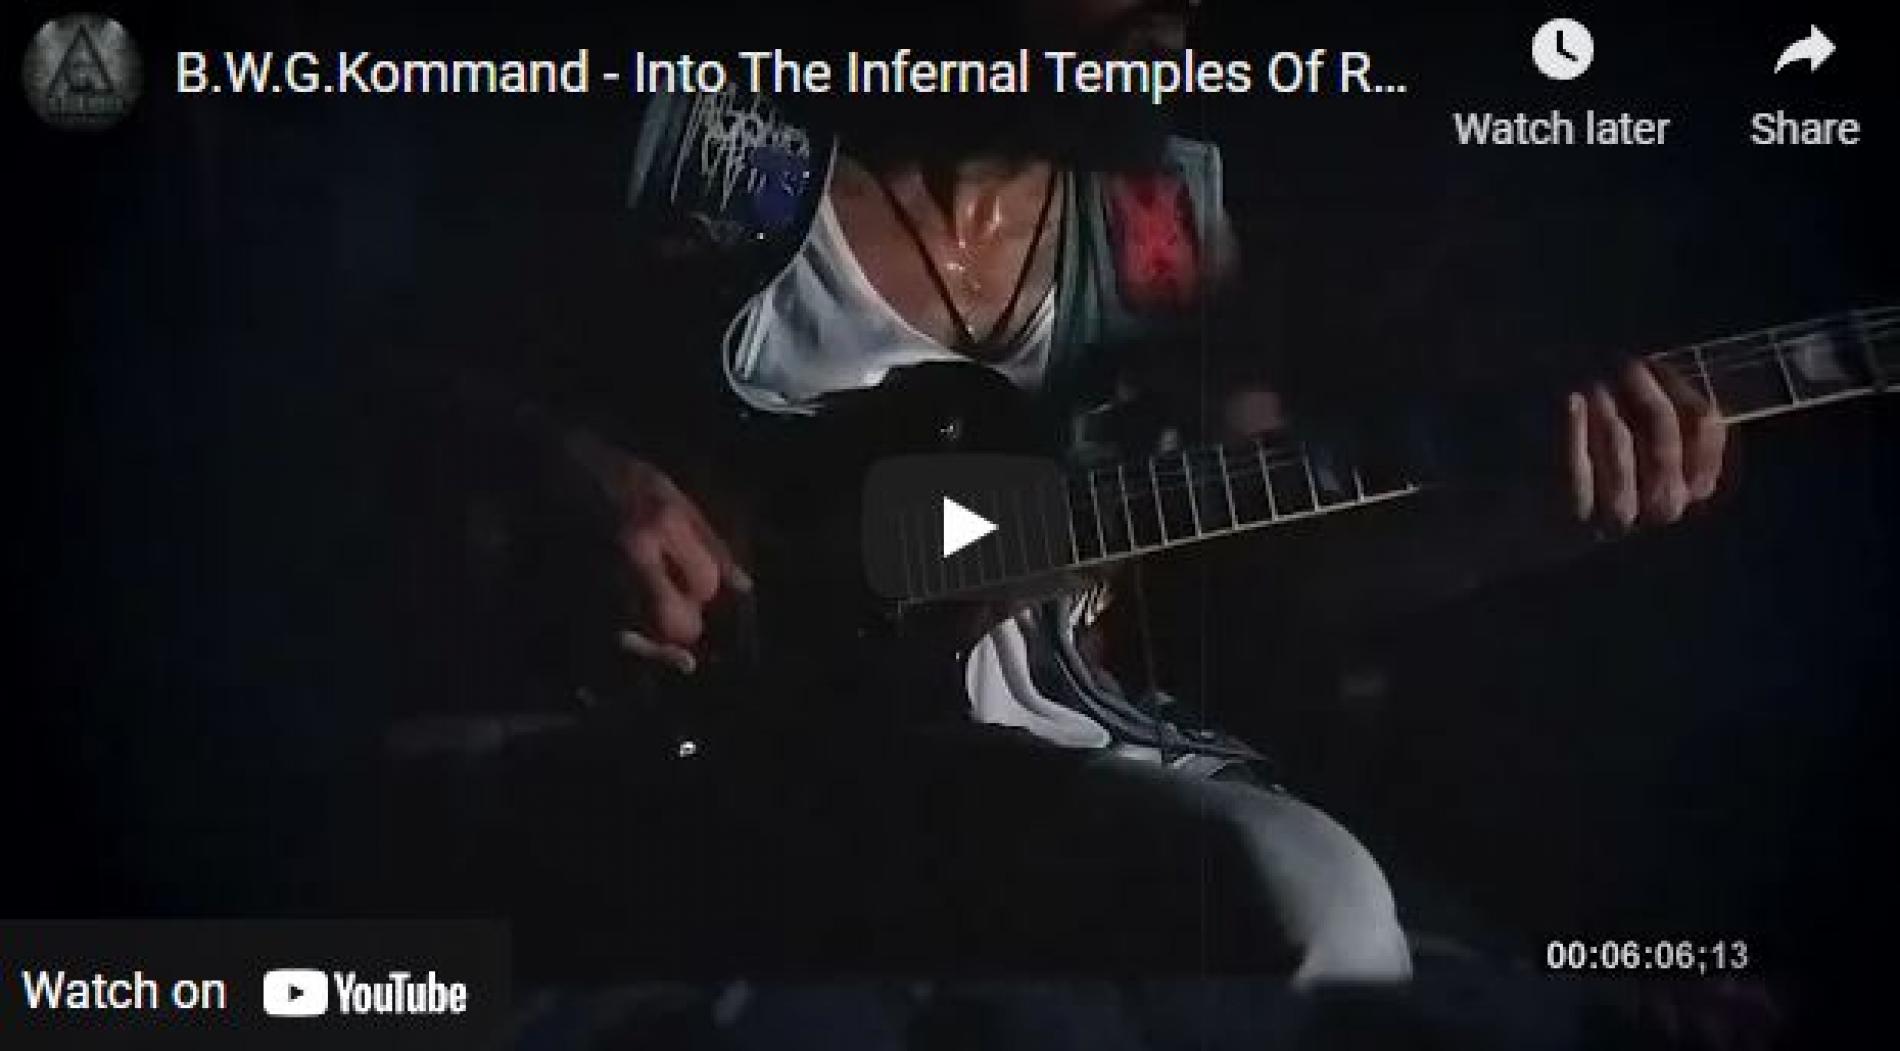 New Music : B.W.G.Kommand – Into The Infernal Temples Of RavanCult [Funeral In Heaven Cover] Guitar Playthrough